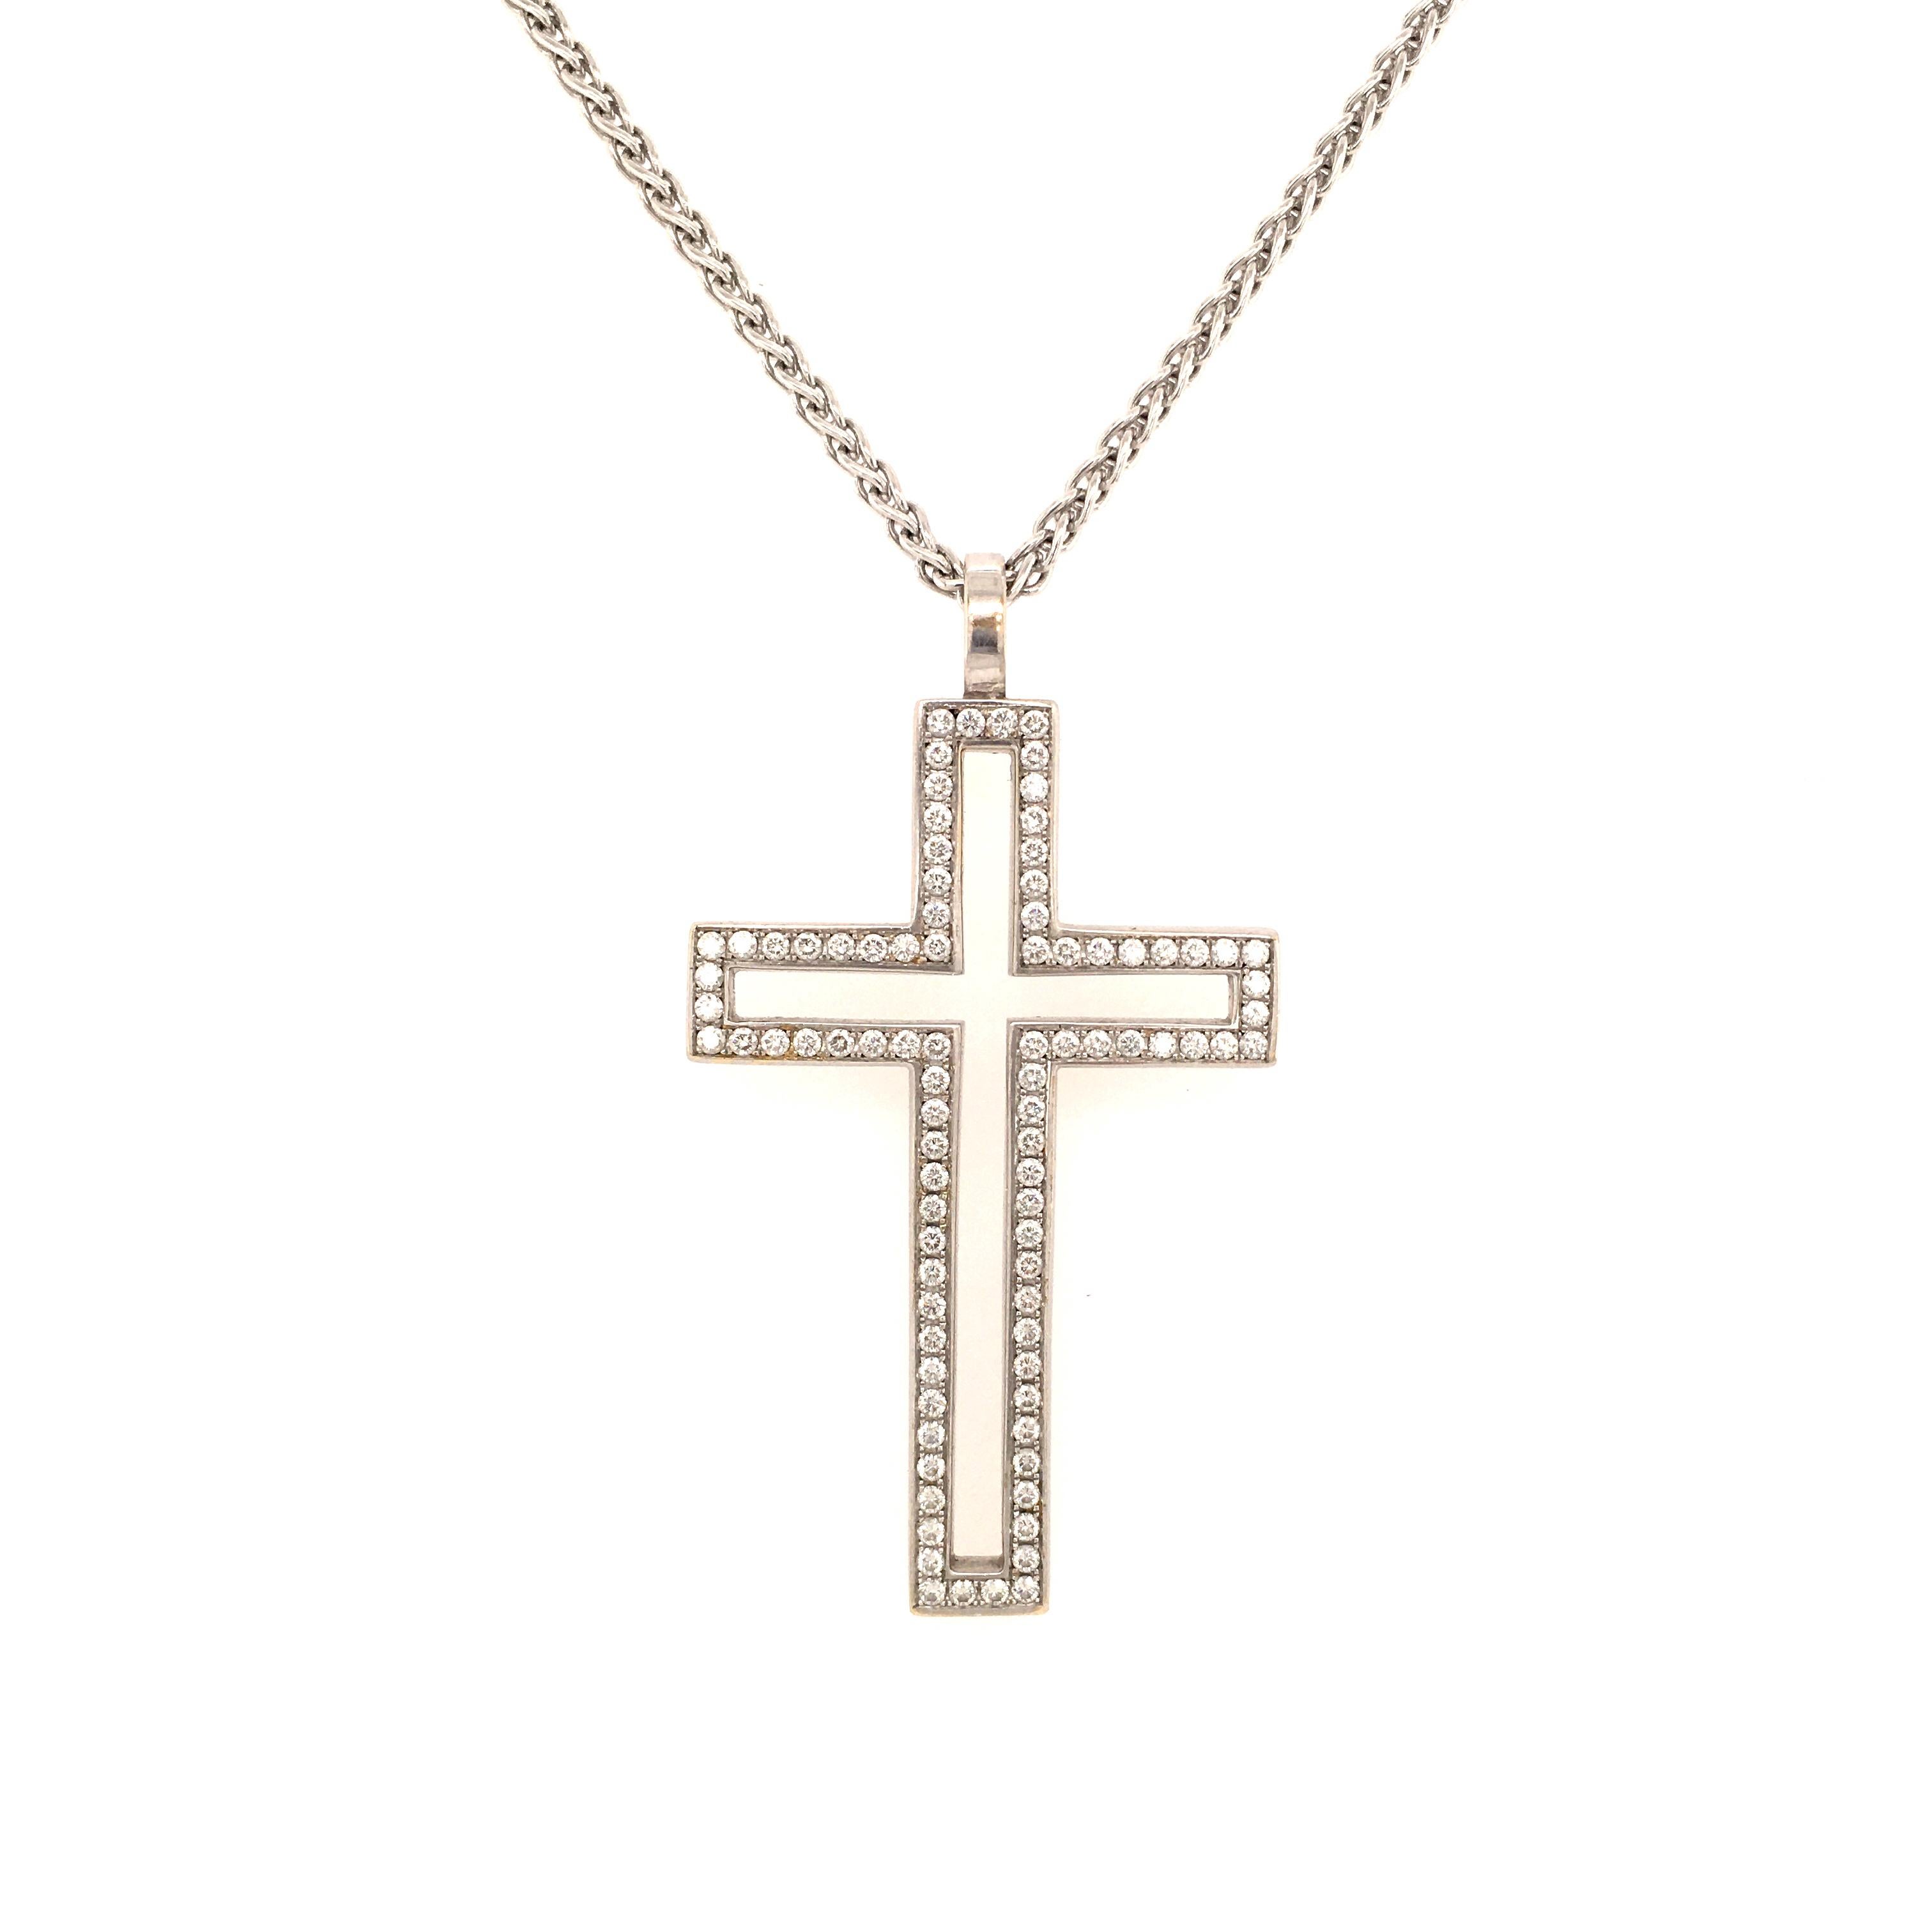 Gorgeous white gold 750 cross pendant carefully set with 88 brilliant cut diamonds totaling approx. 1.20 ct of G/H-si quality.

Dimensions: 5.0 x 3.2 cm / 1.96 x 1.26 inches
Maker's mark: present
Assay mark: 750

Price without chain. We carry many